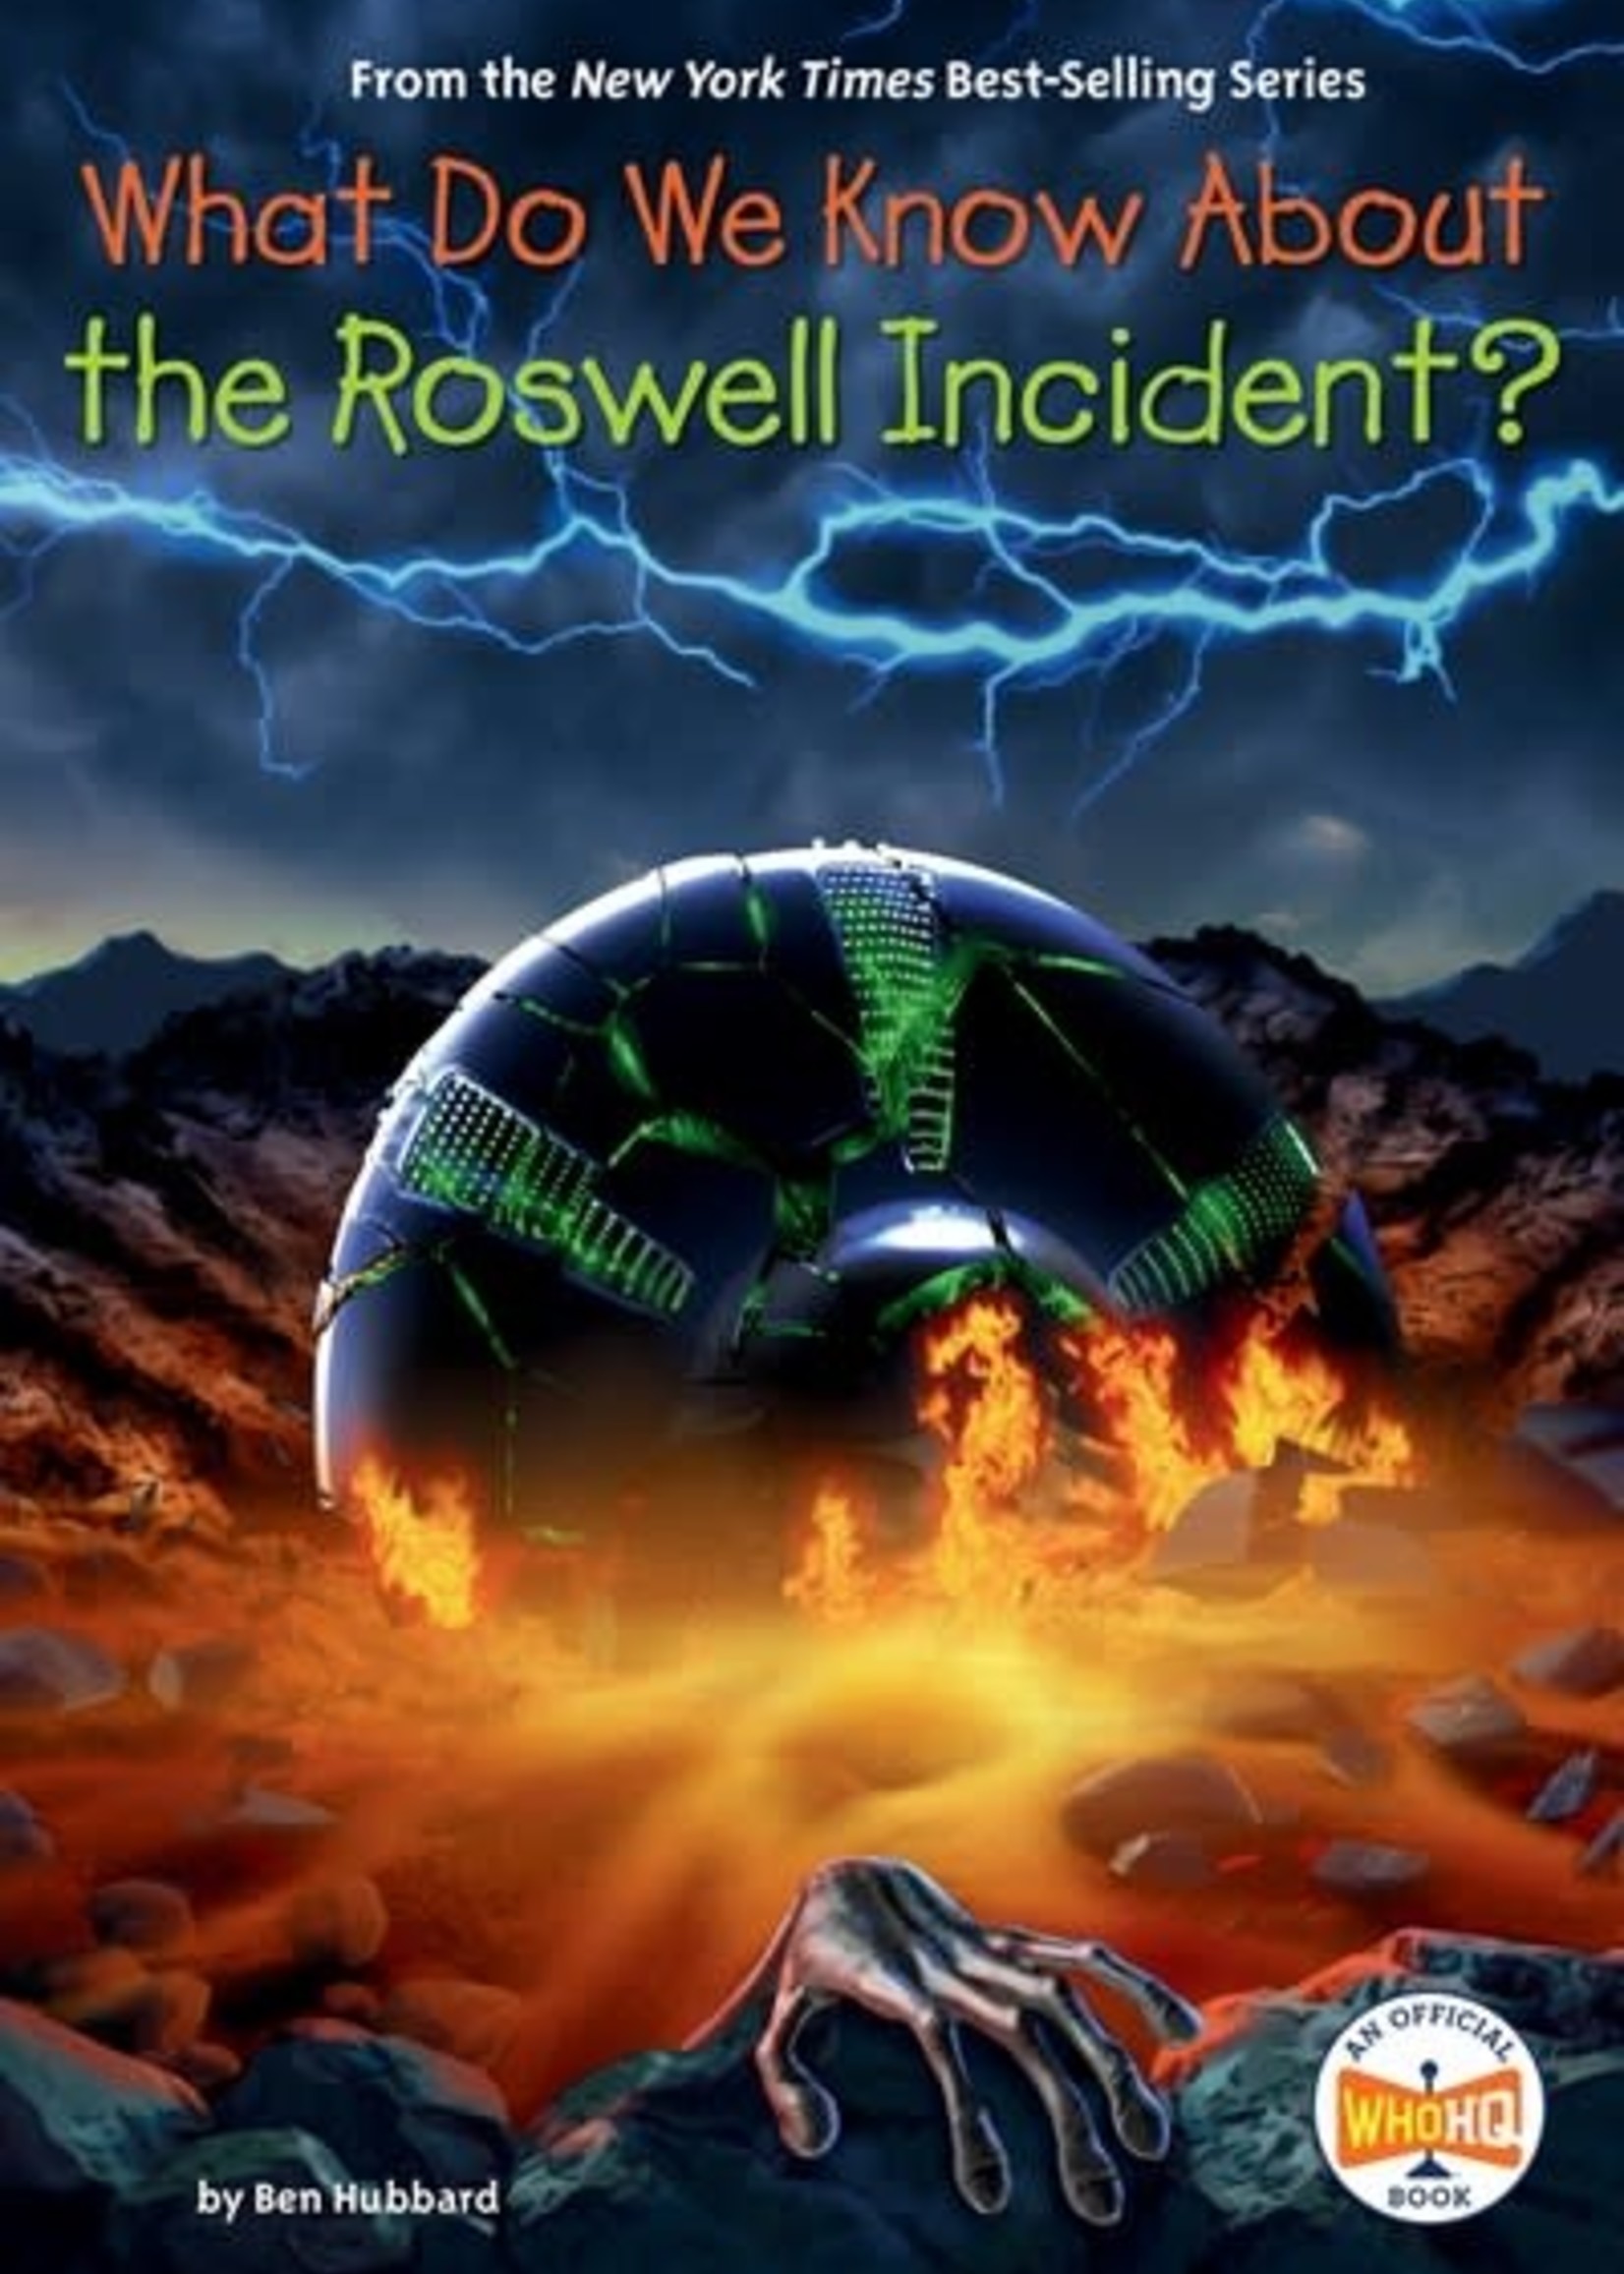 What do we Know About the Roswell Incident